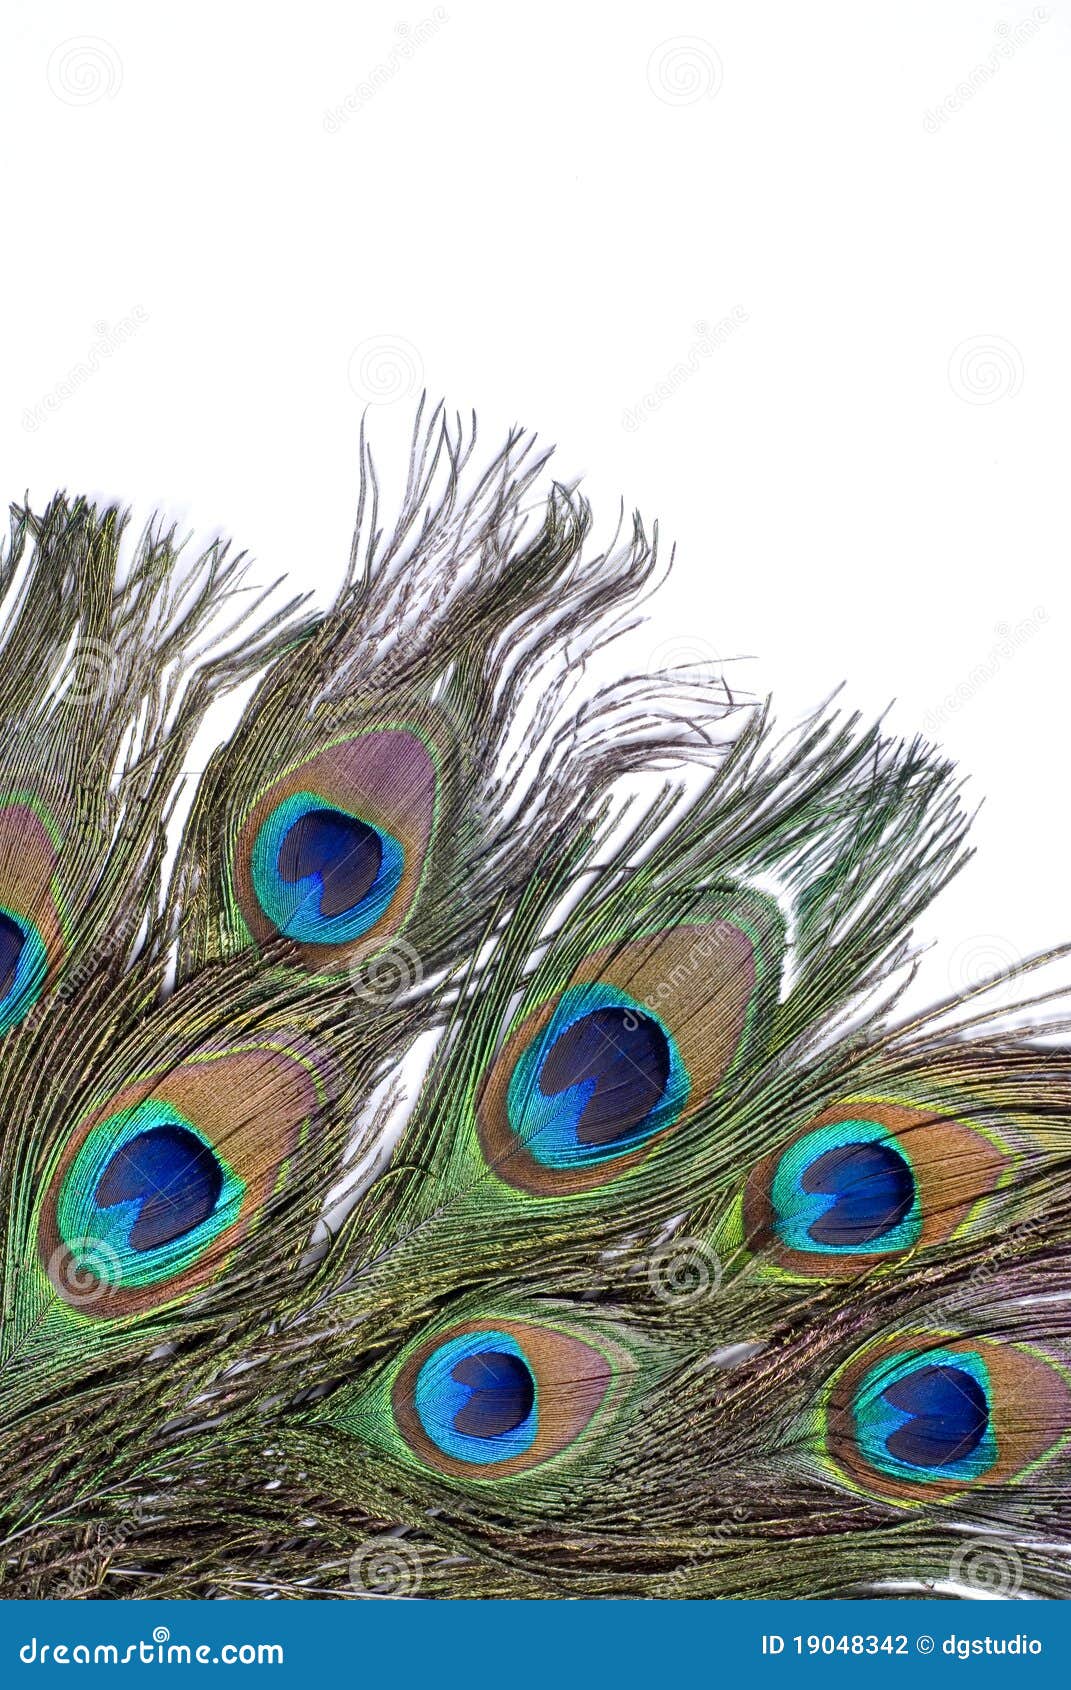 Peacock quiver feather stock photo. Image of bird, swaying - 19048342